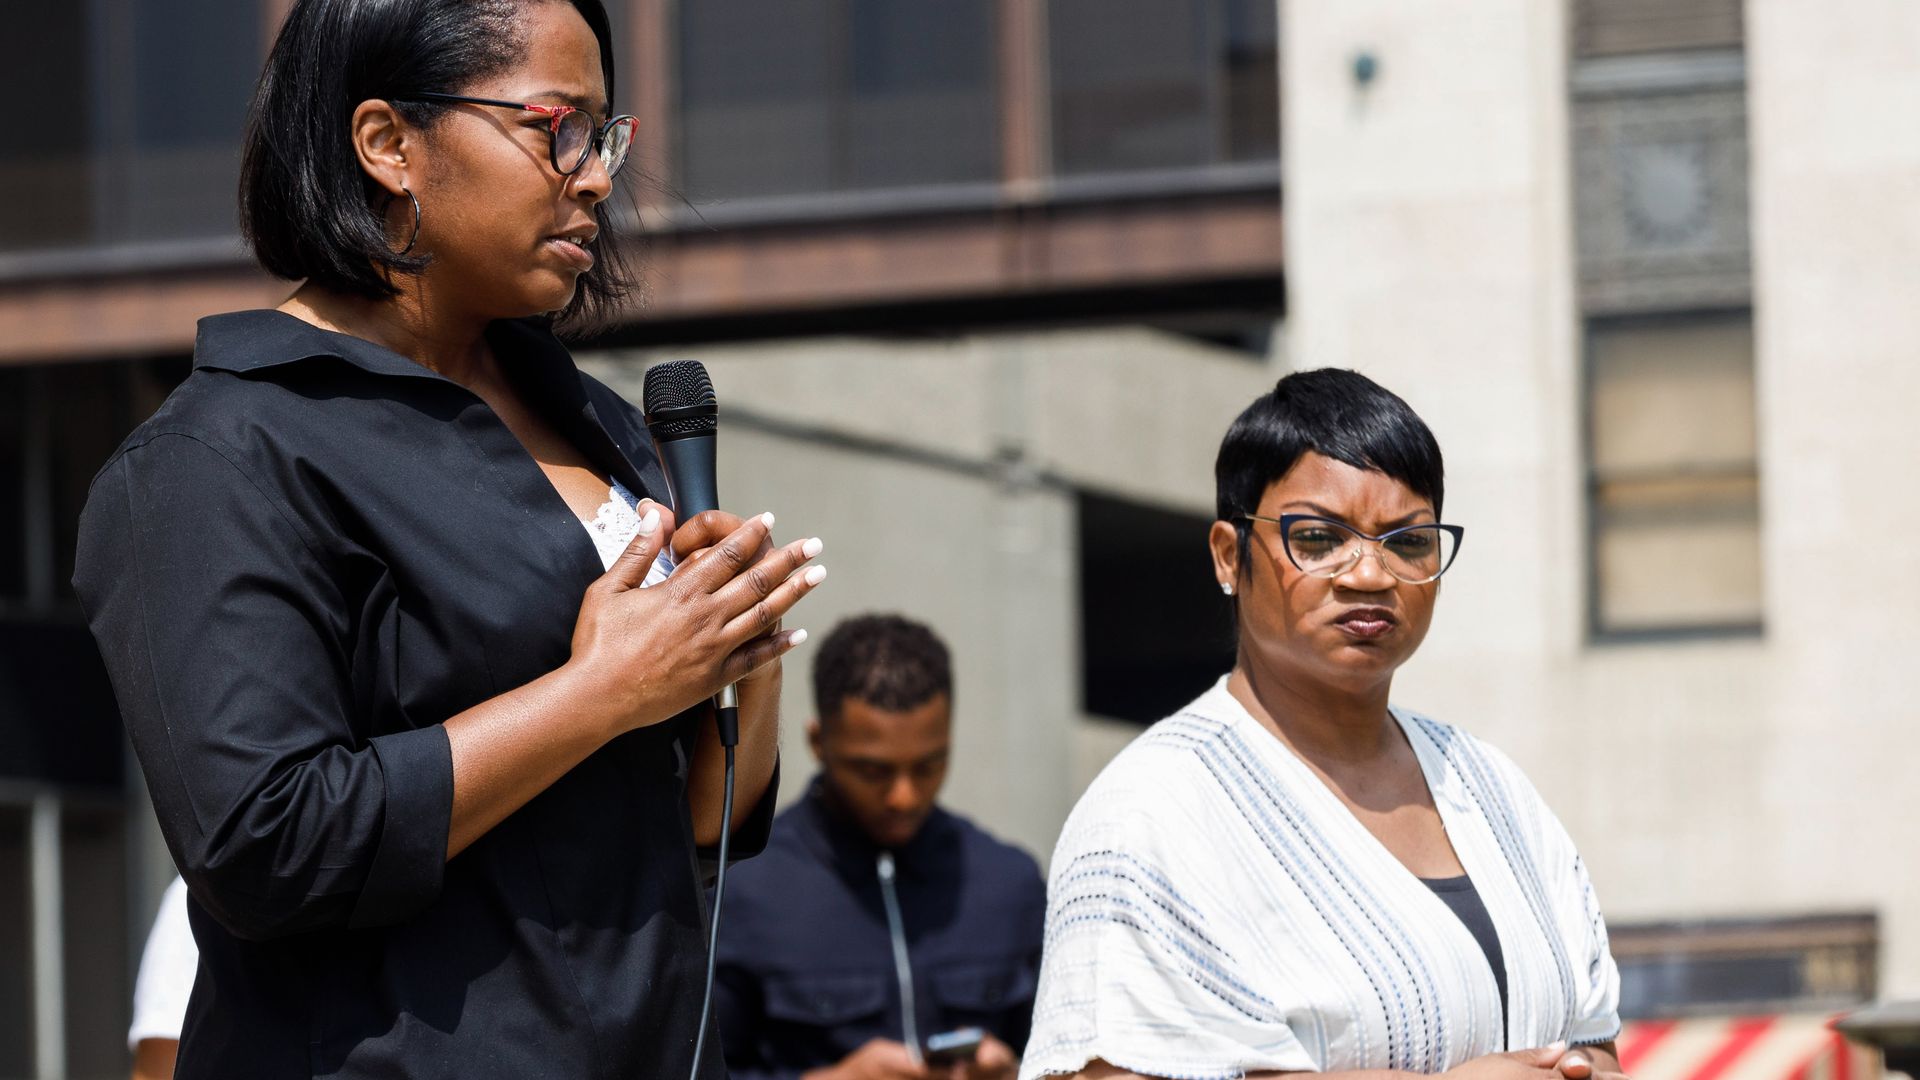 Columbus Police Chief Elaine Bryant and Assistant Chief LaShanna Potts are seen at a rally, with Bryant speaking into a microphone.